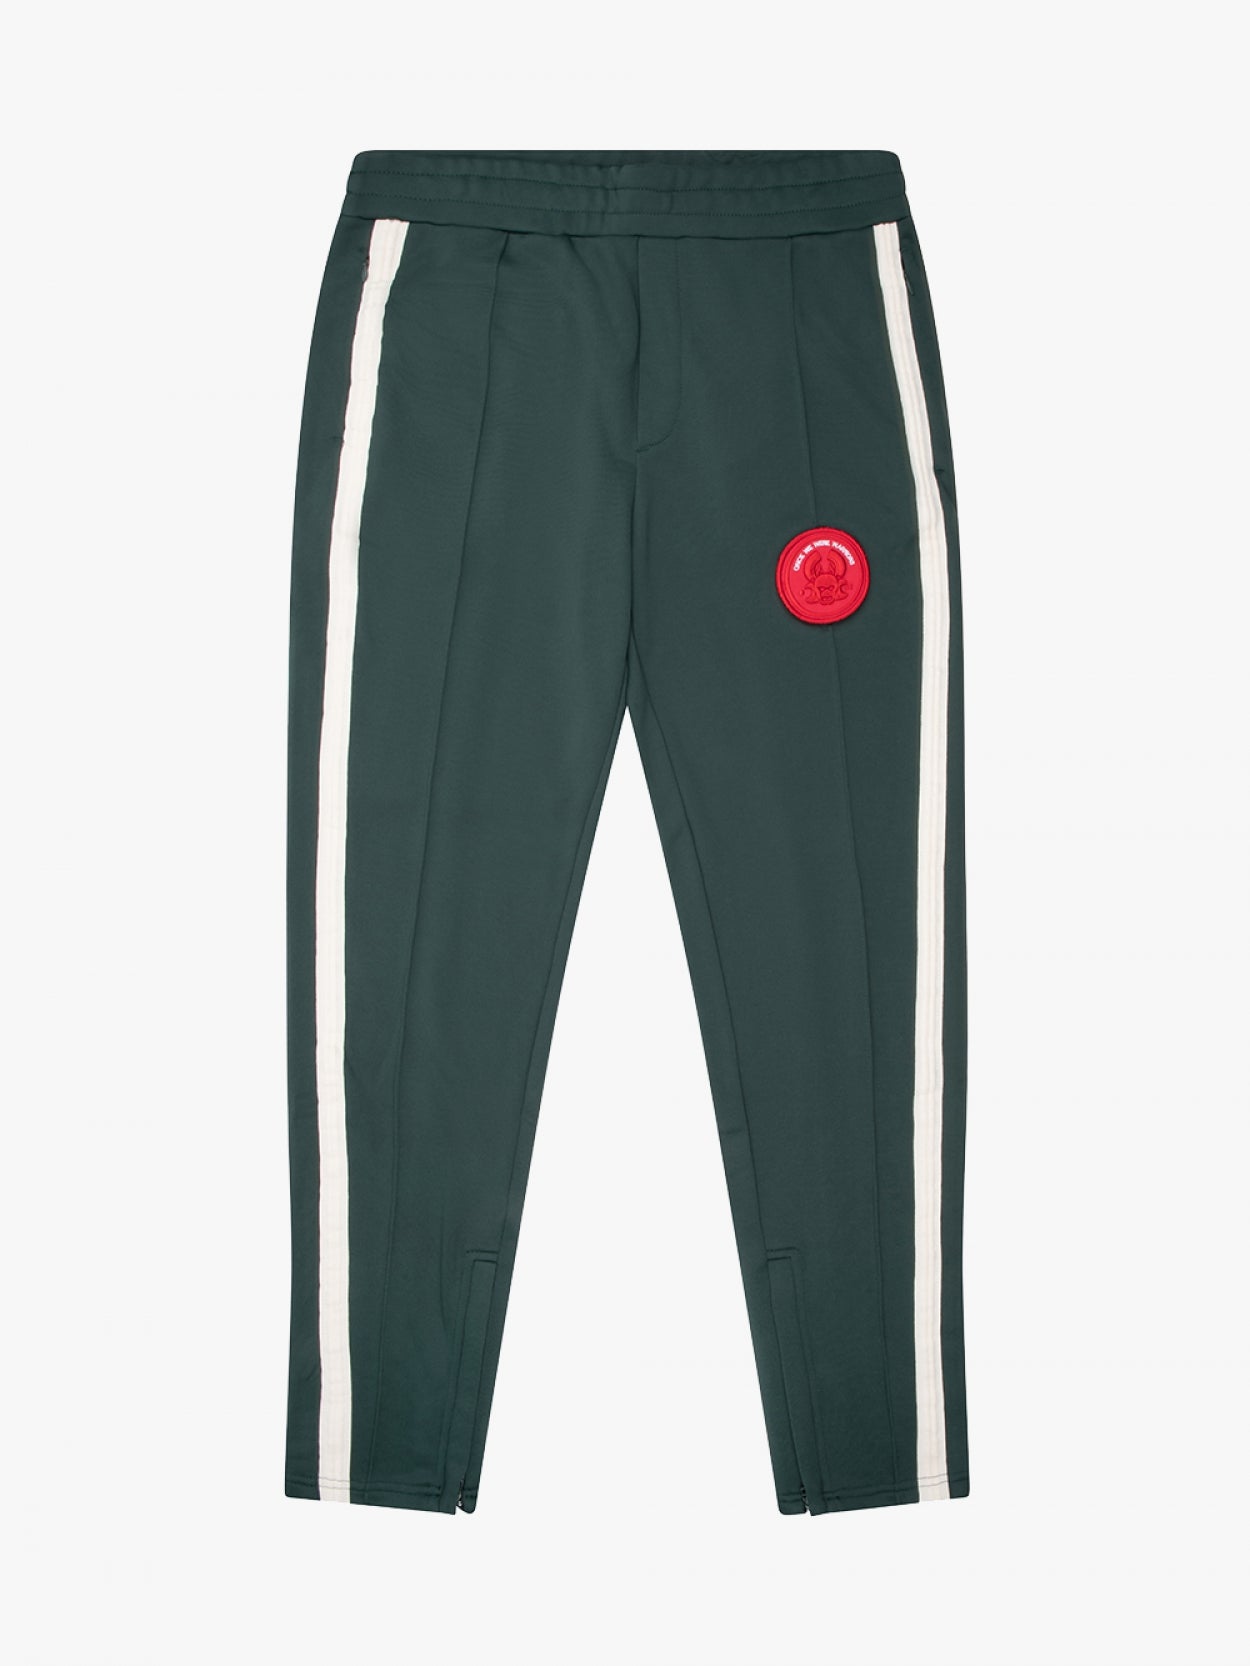 Wesk Track Pants | dark green - Once We Were Warriors